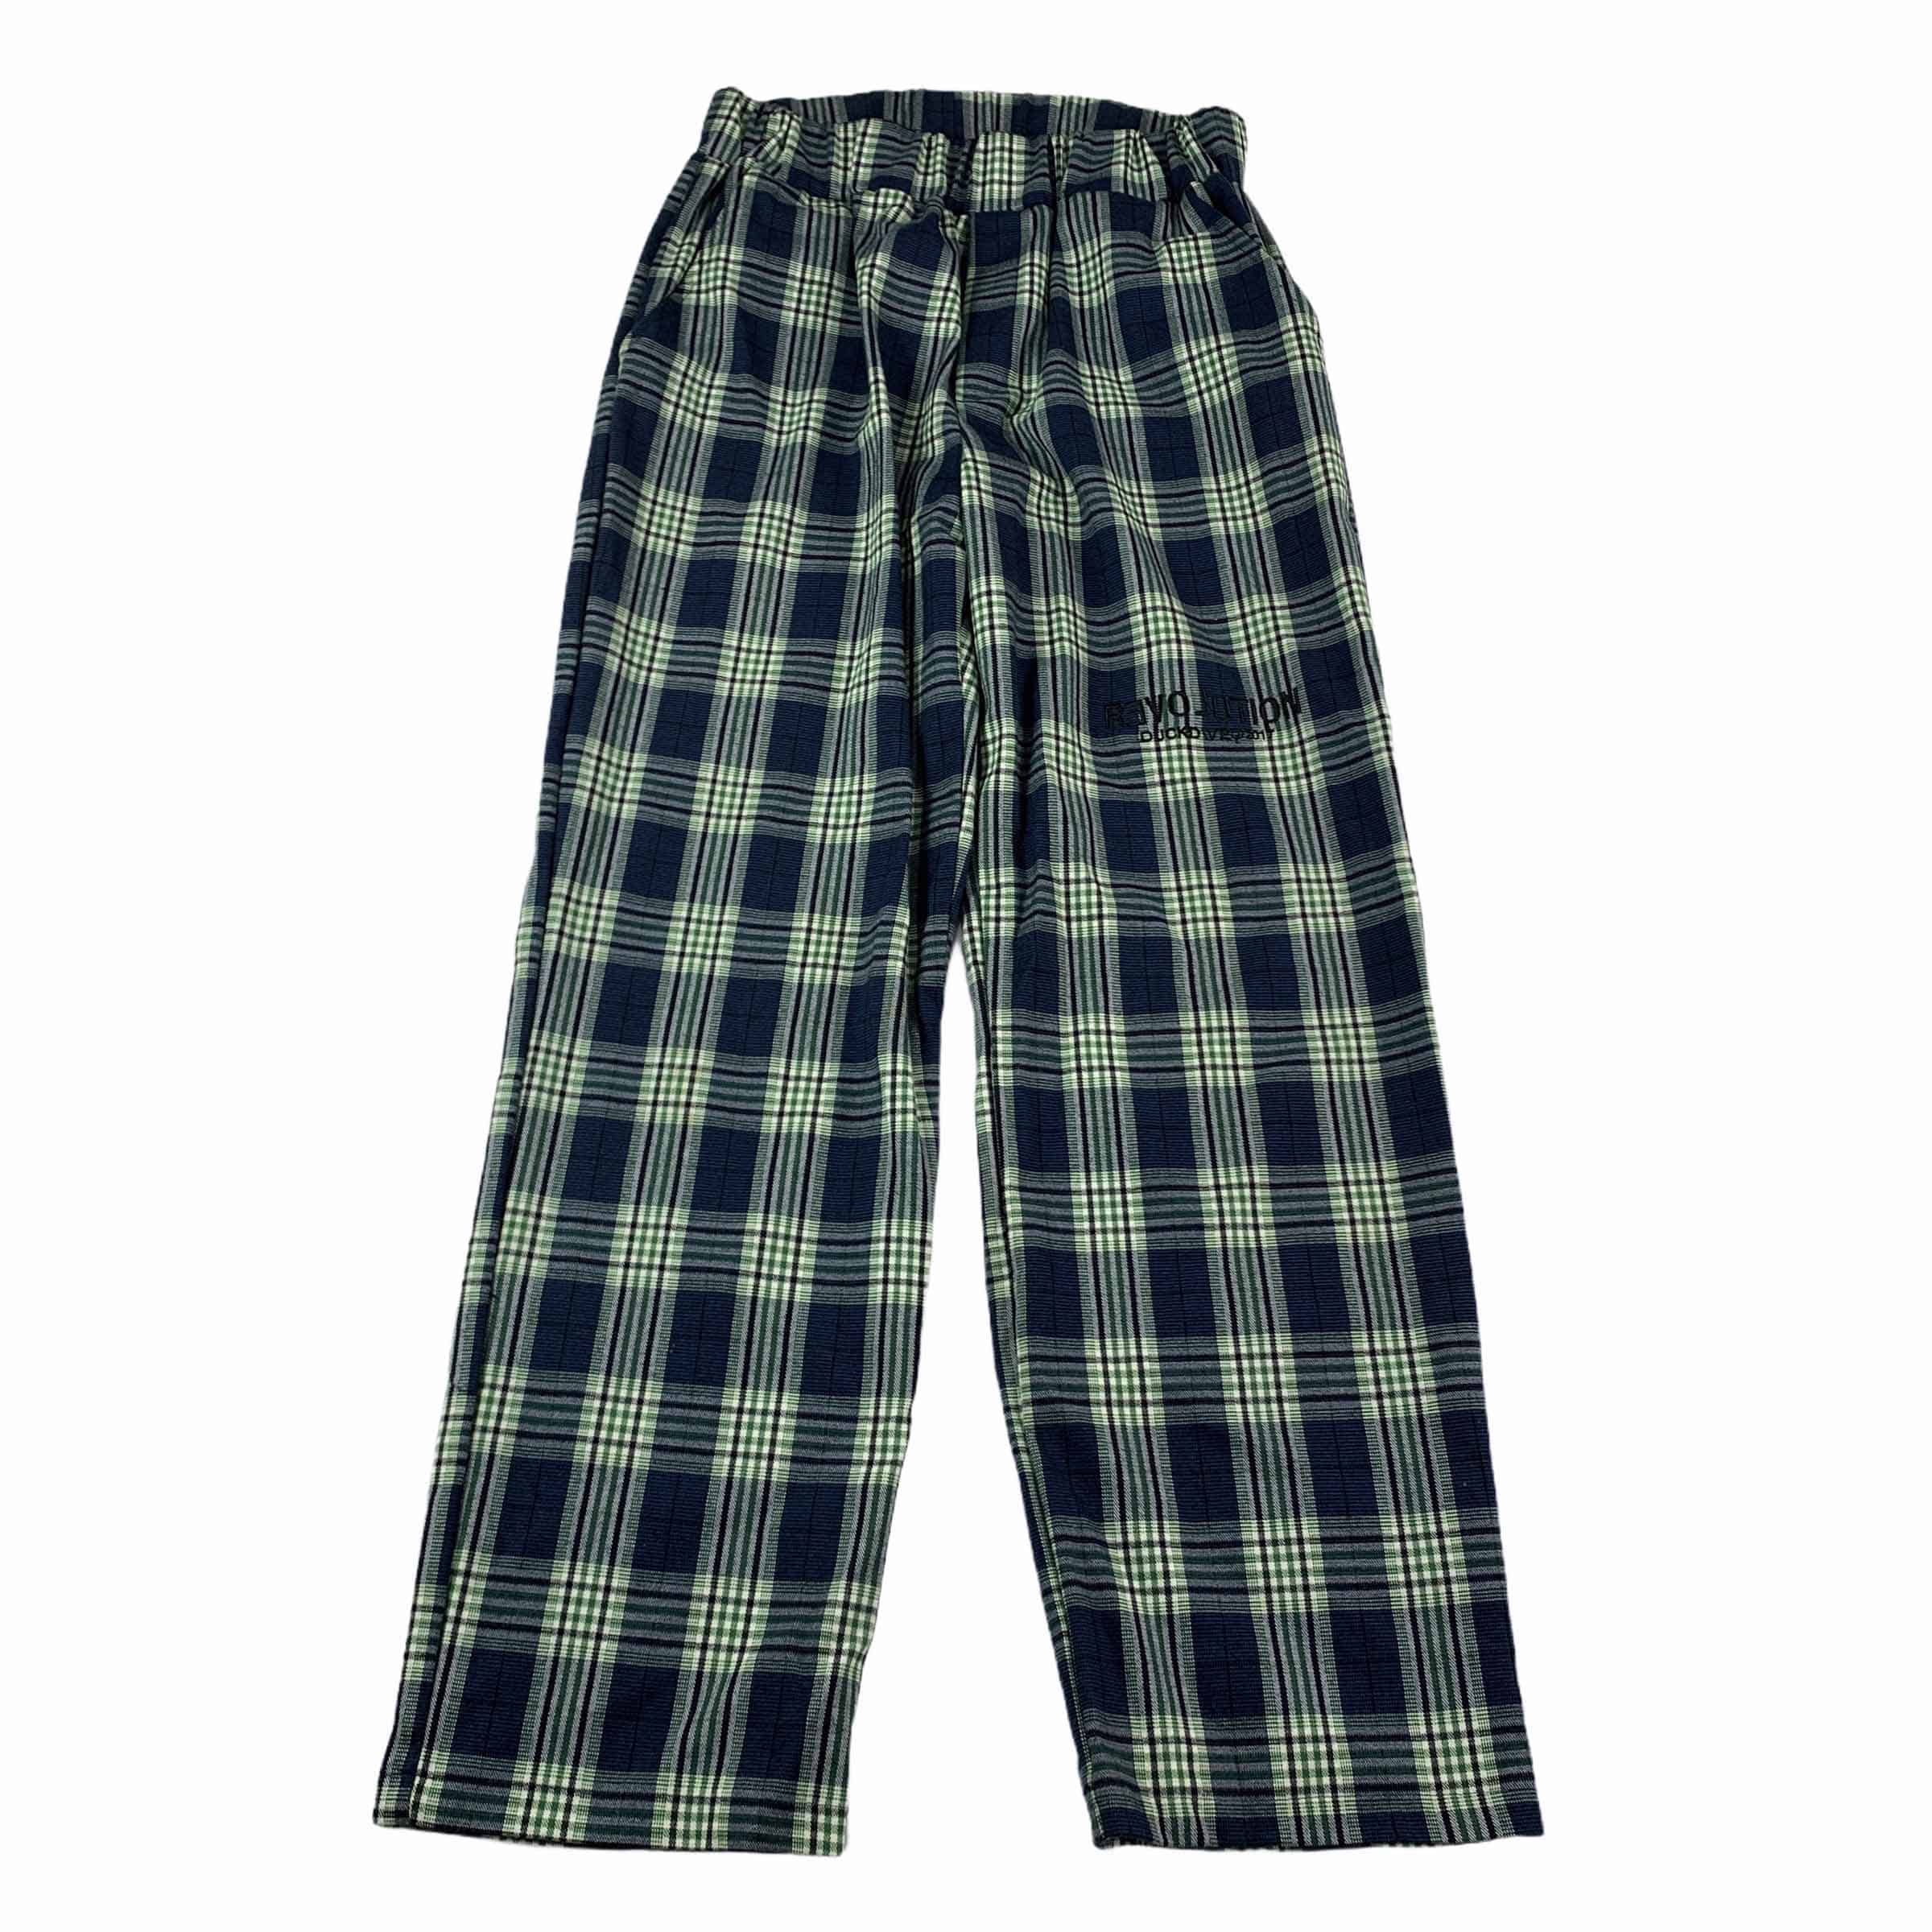 [Duckdive] Check banding trousers - Size L